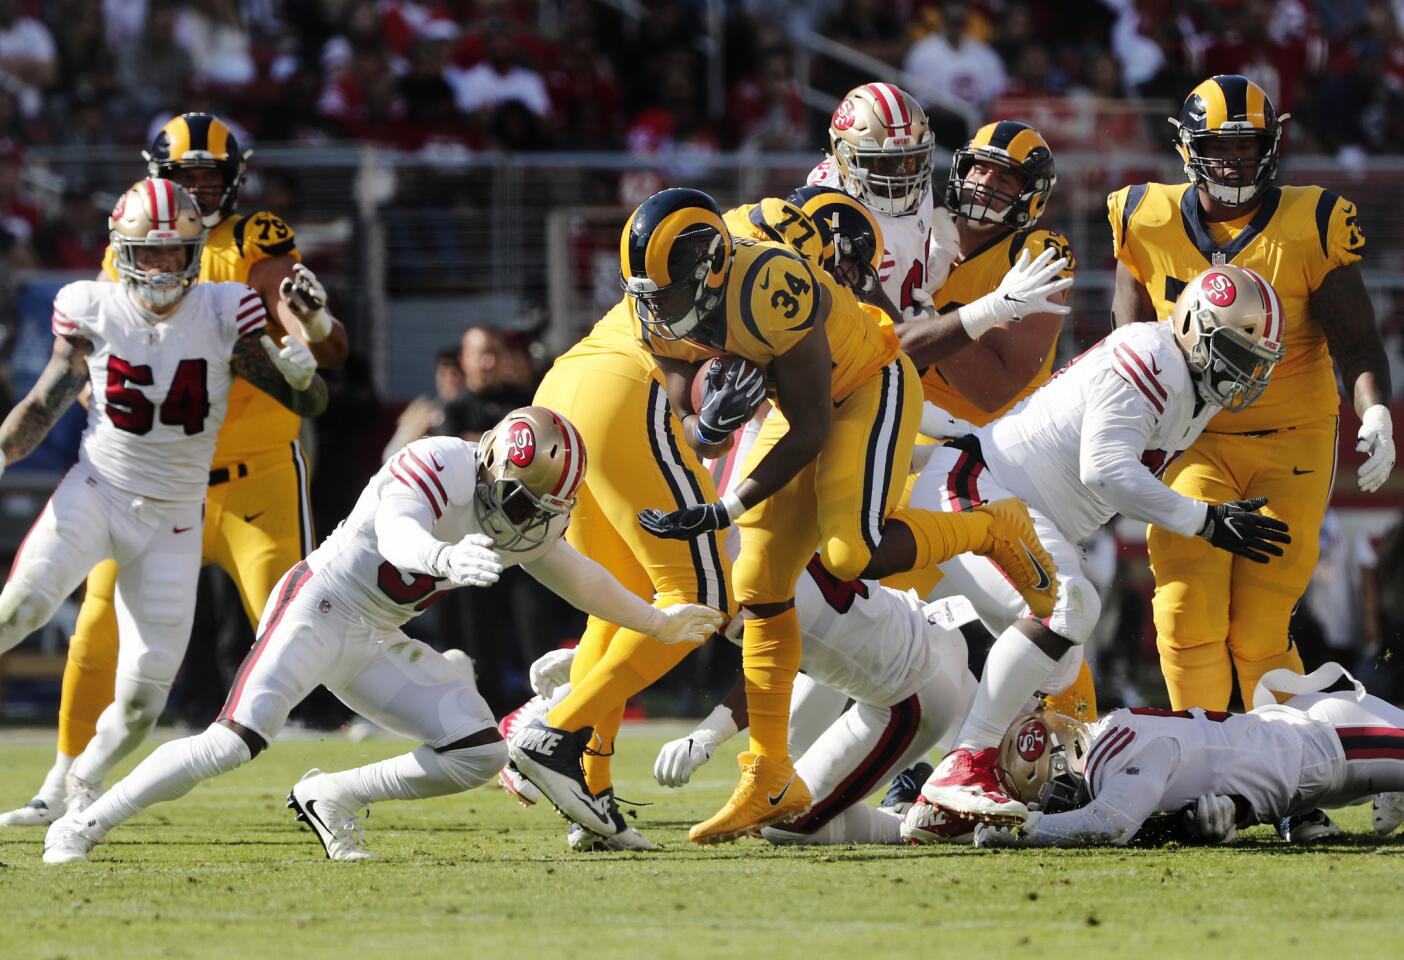 Rams running back Malcolm Brown (34) breaks though defenders as San Francisco 49ers cornerback D.J. Reed (32) goes for the tackle in the first half at Levi's Stadium on Sunday in Santa Clara.